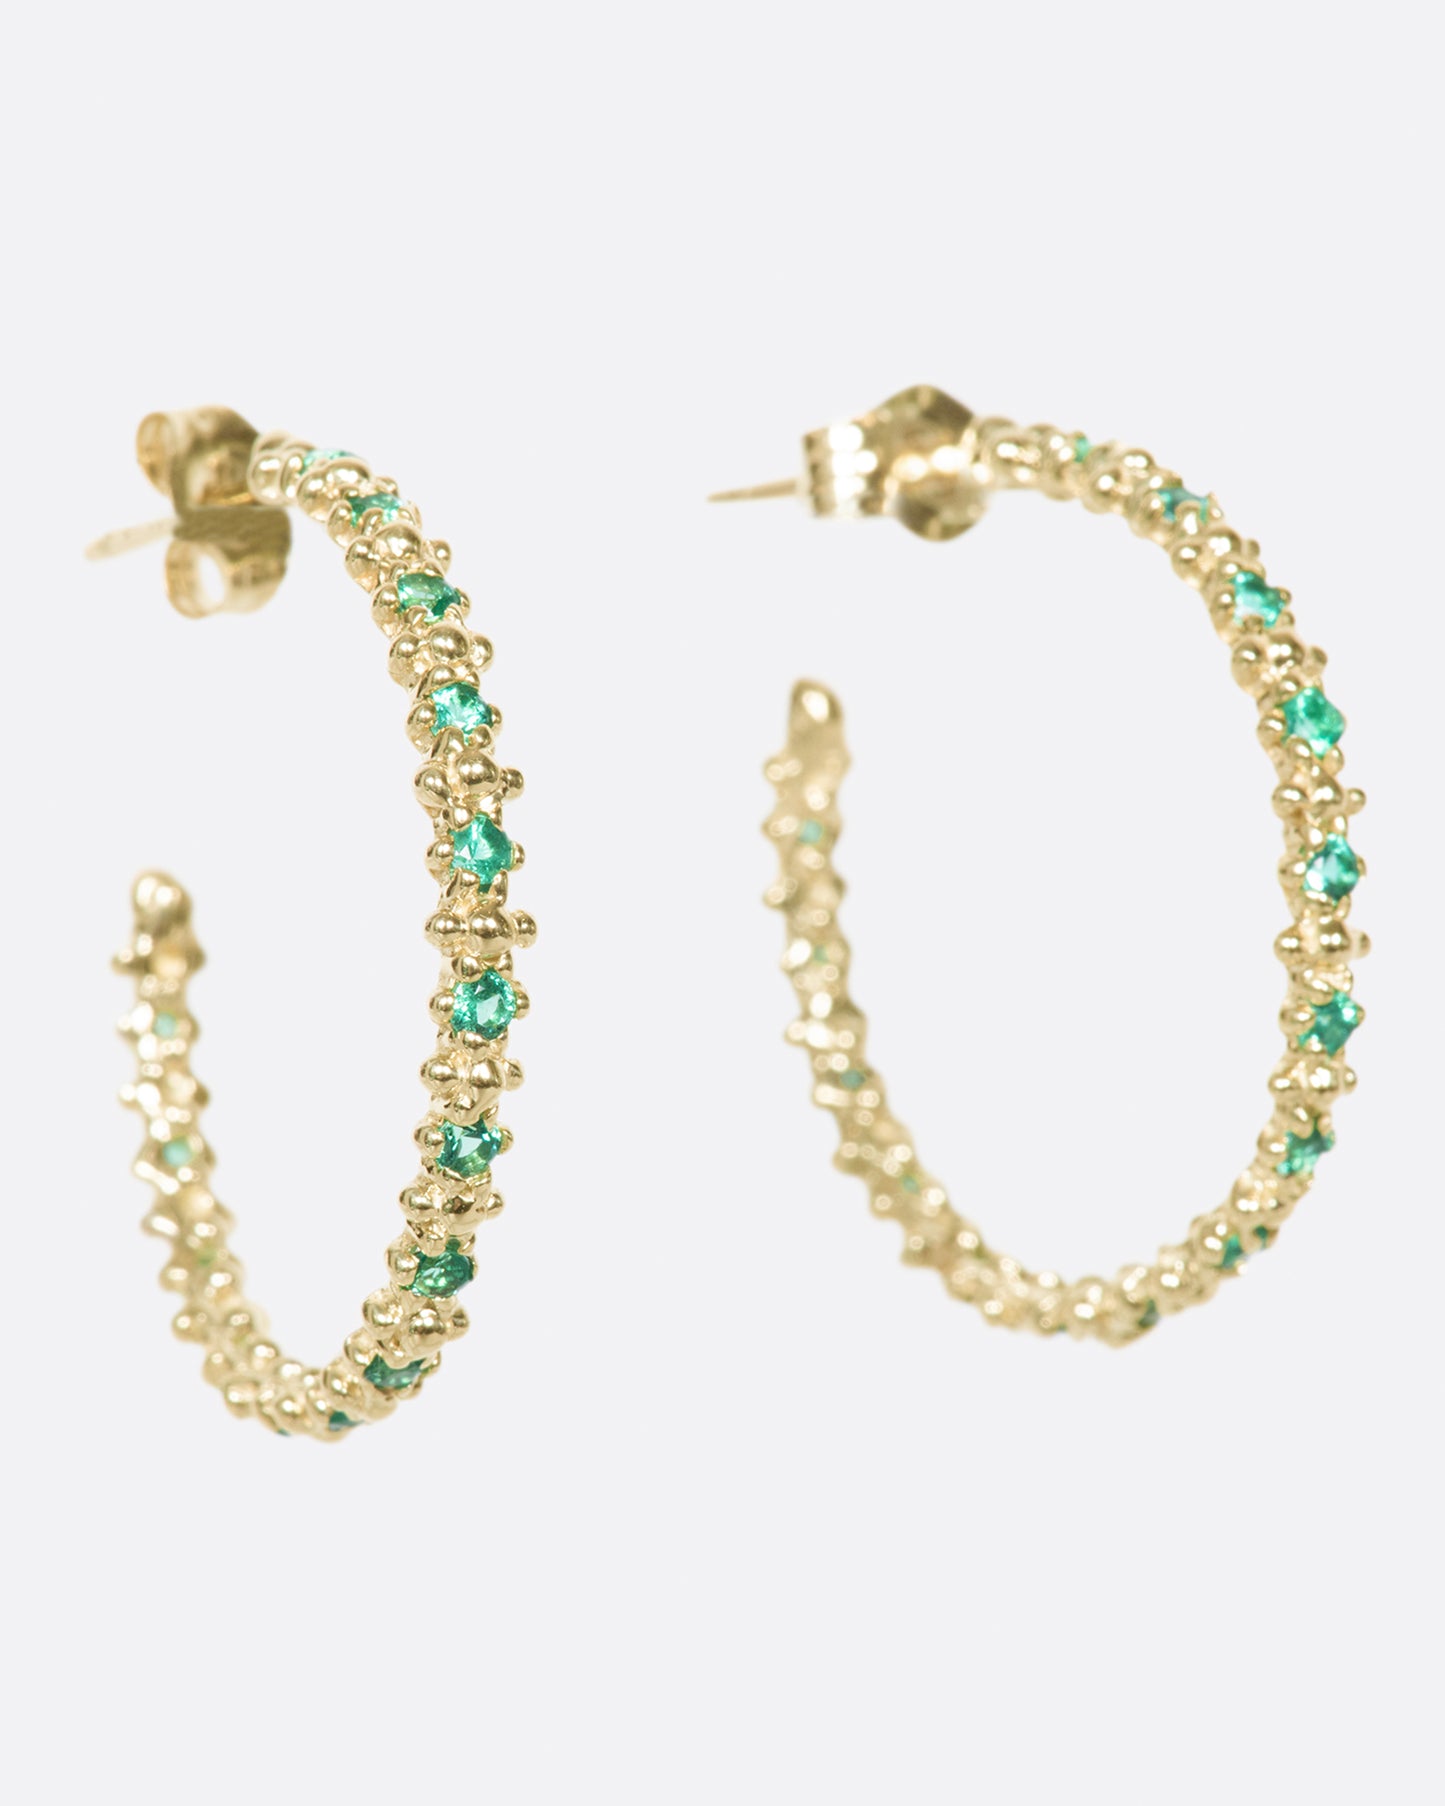 A pair of textured hoop earrings with emeralds dotted throughout.